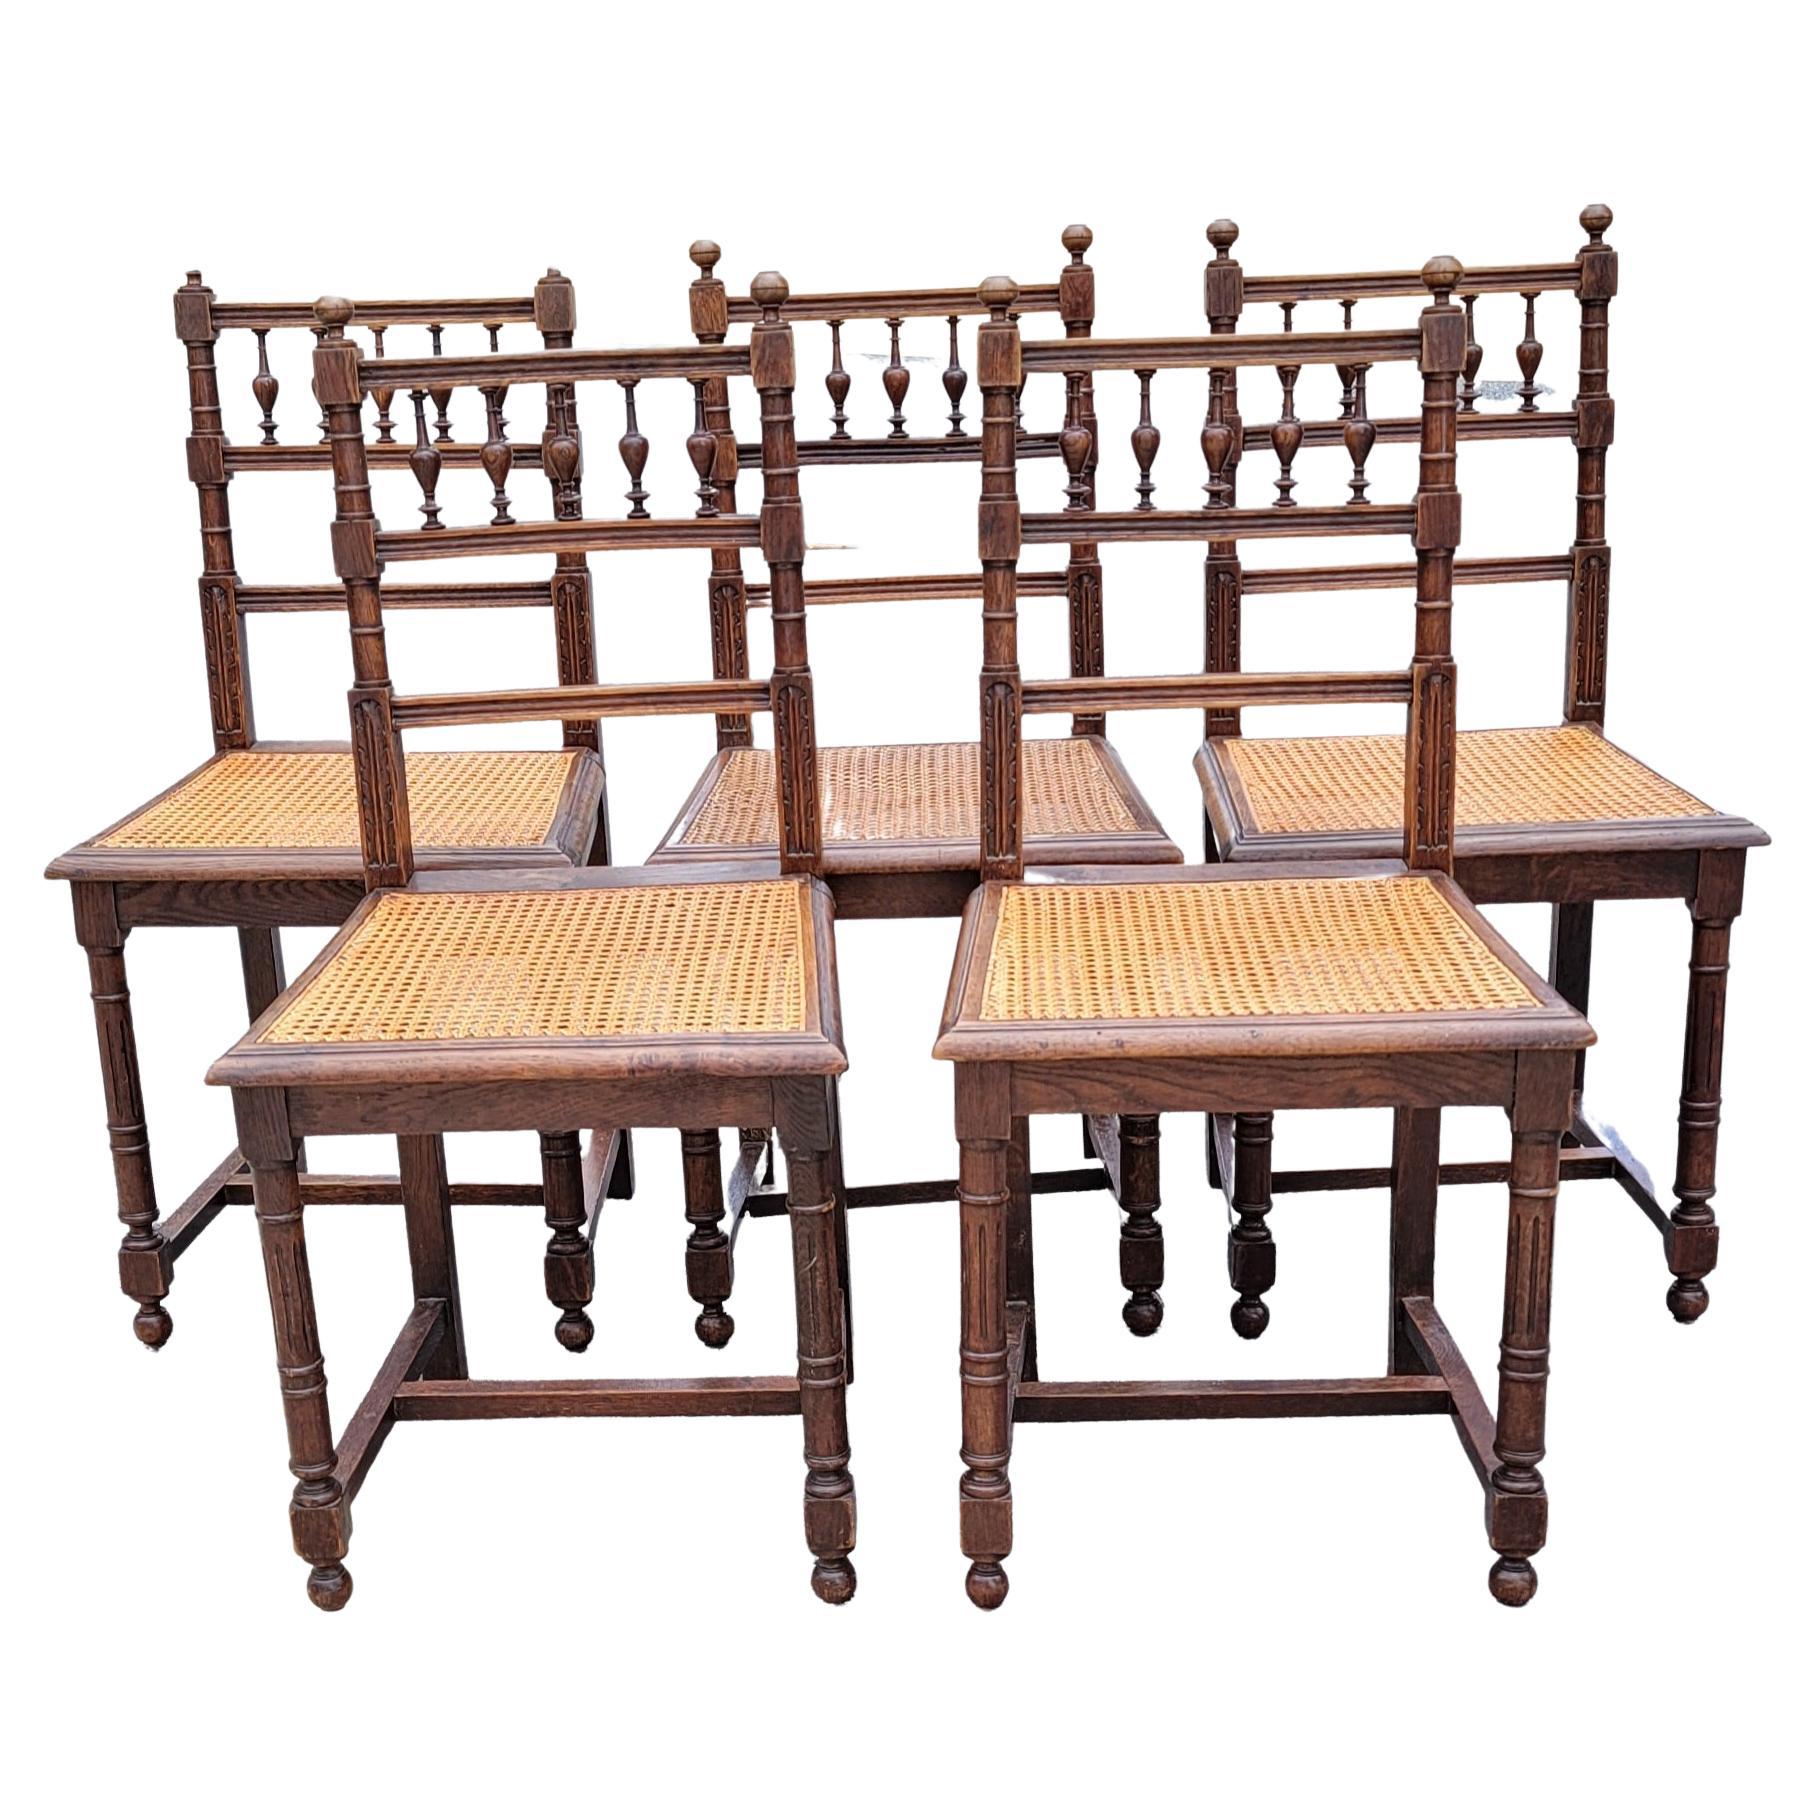 A beautiful set of 5  of French Renaissance  Henry II style chairs from the turn of the twentieth century.
Solidly made of oak wood,  braided cane seats , backrest decorated with intricately hand carved balusters.
Made of very good quality wood.